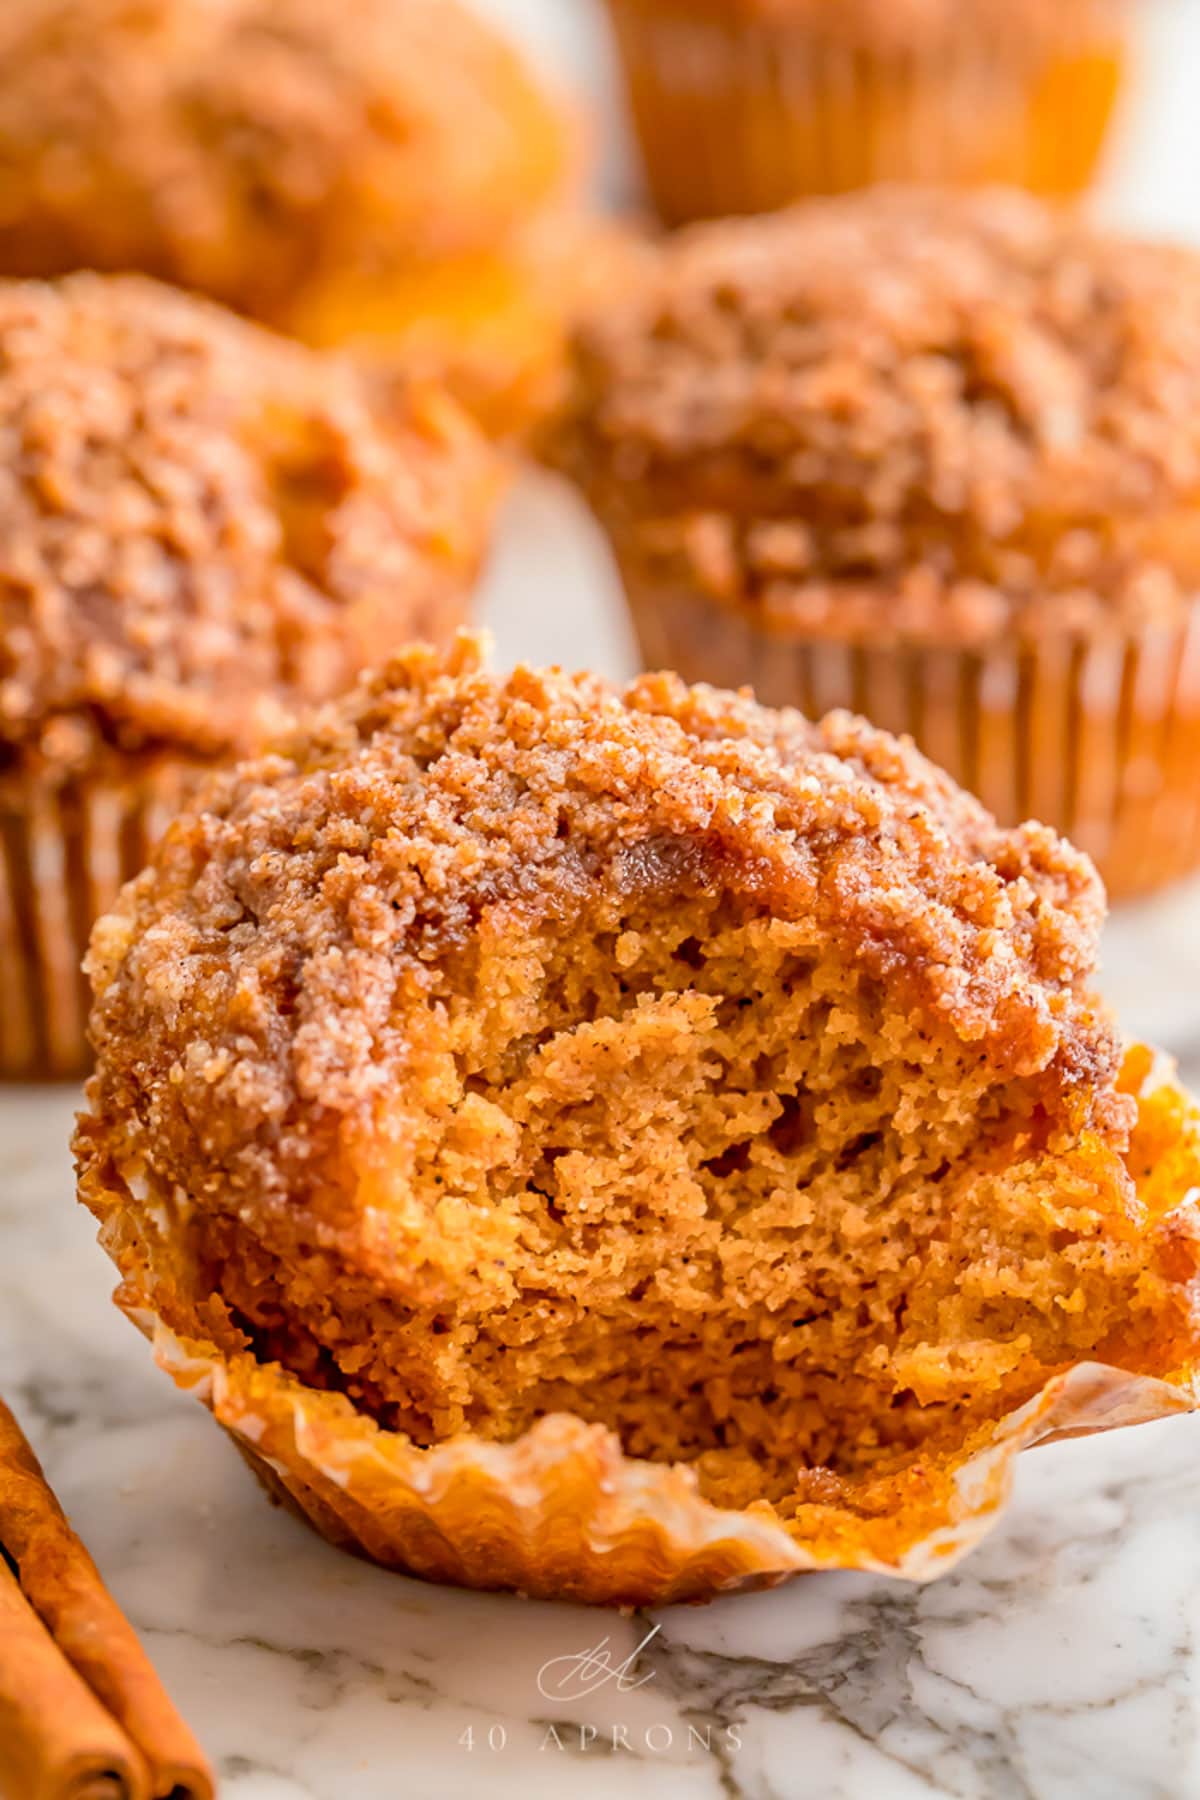 A pumpkin muffin, with the paper lining peeled down and a large bite missing from the front side of the muffin. More whole muffins stand in the background.